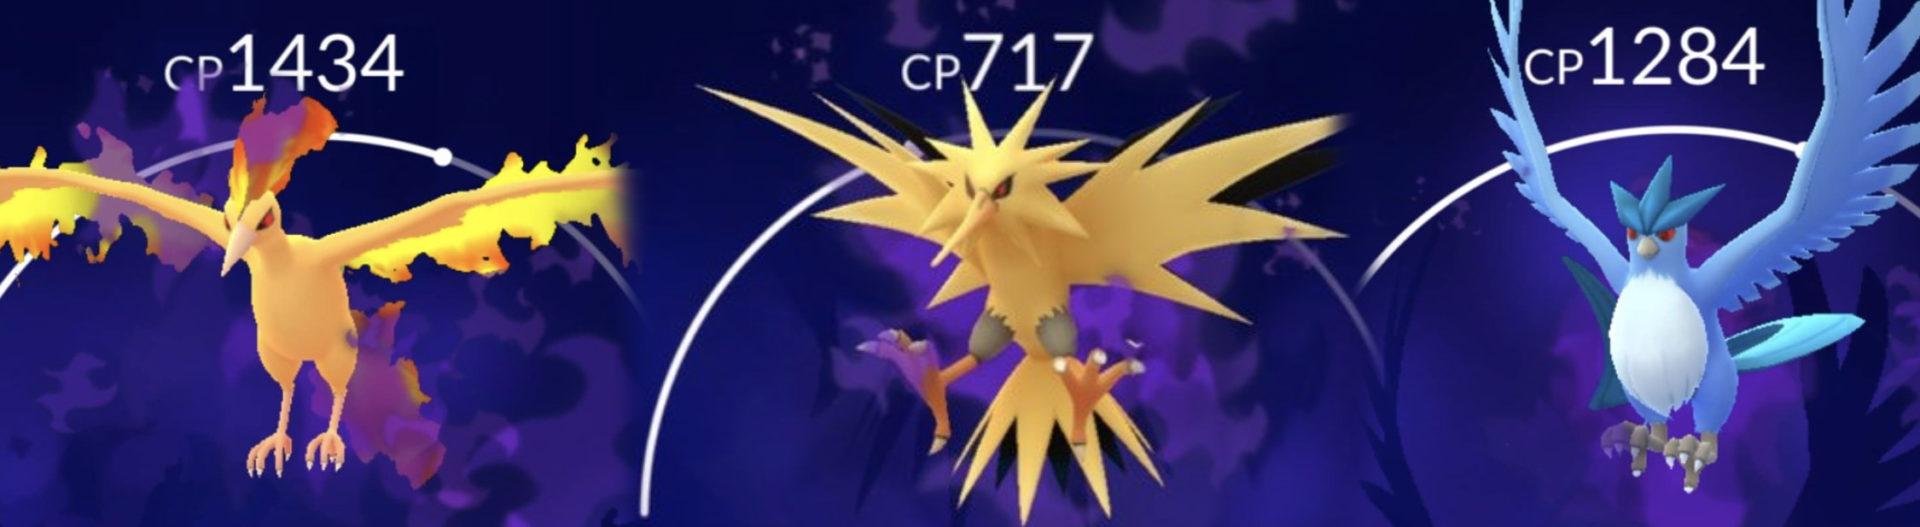 Pokemon GO' Team GO Rocket Box Compensation: Fixed Issues, Shadow Zapdos  Return and MORE